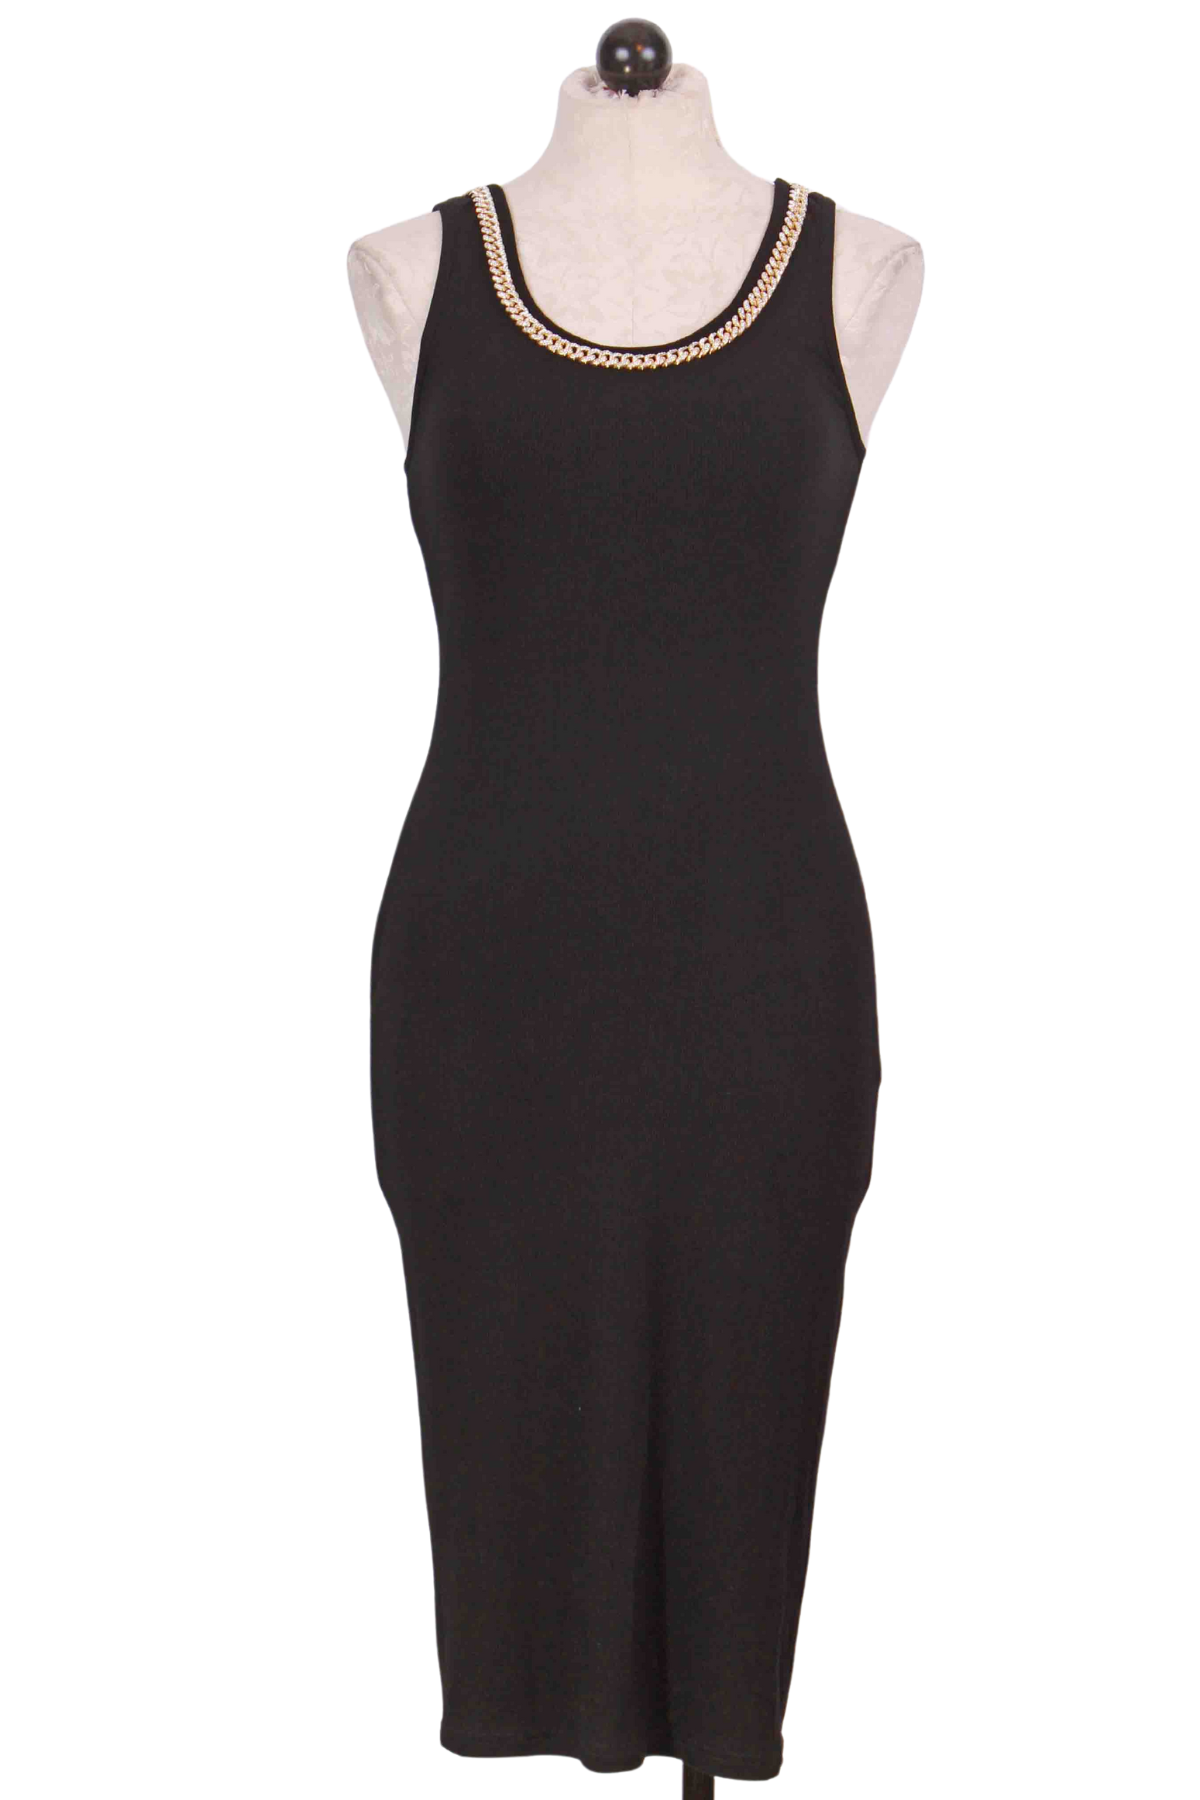 Black Eve Crystal Chain Dress by Generation Love